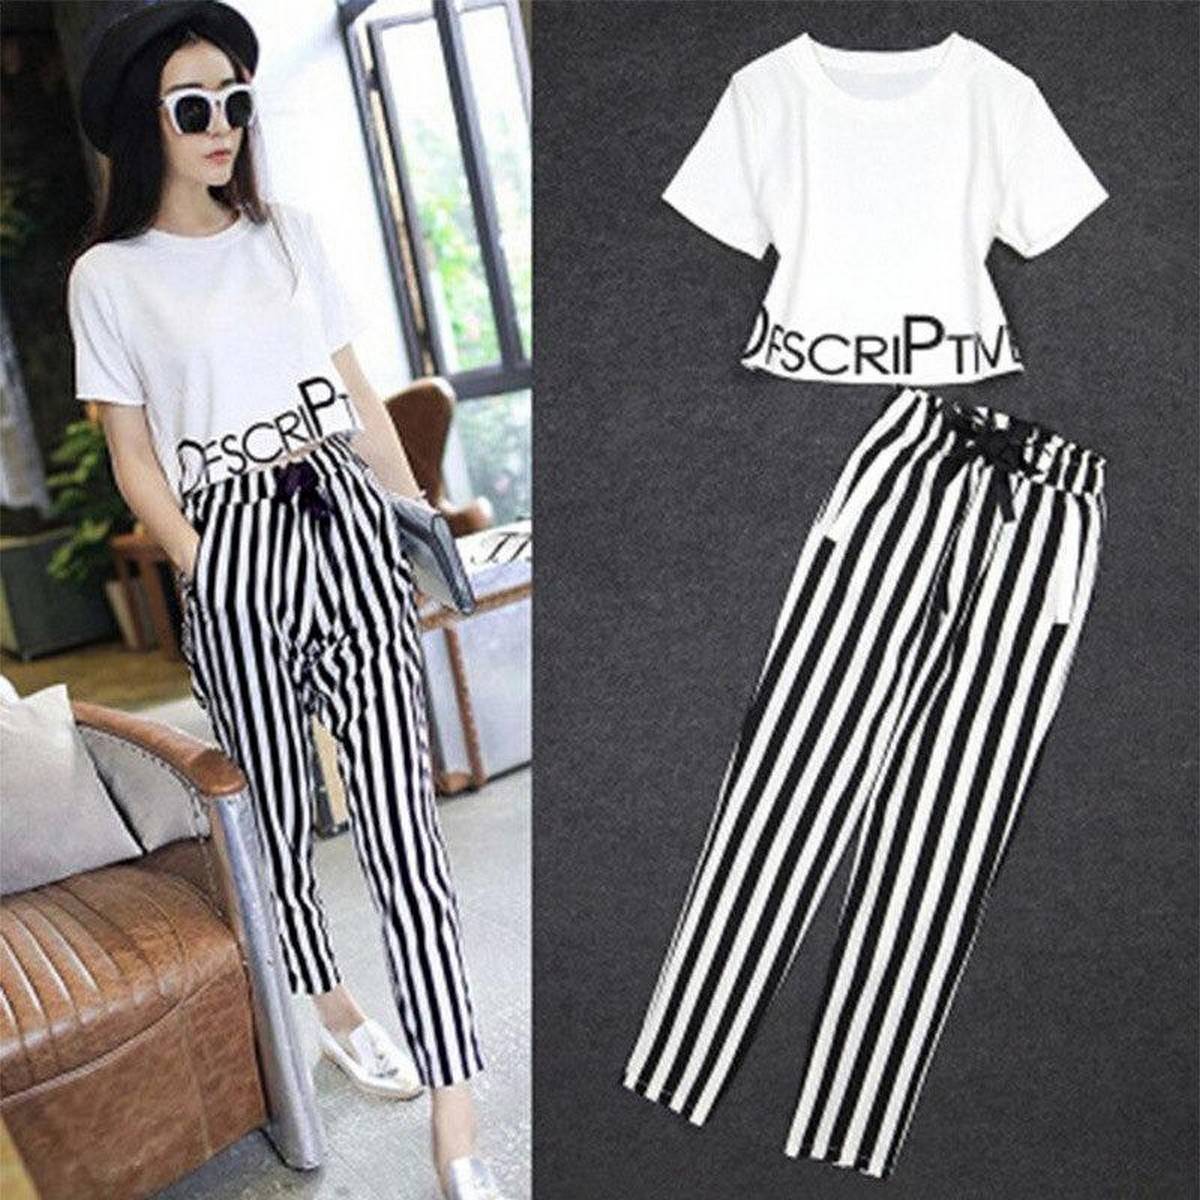 15 Feminine Outfits With Striped Wide Leg Pants - Styleoholic